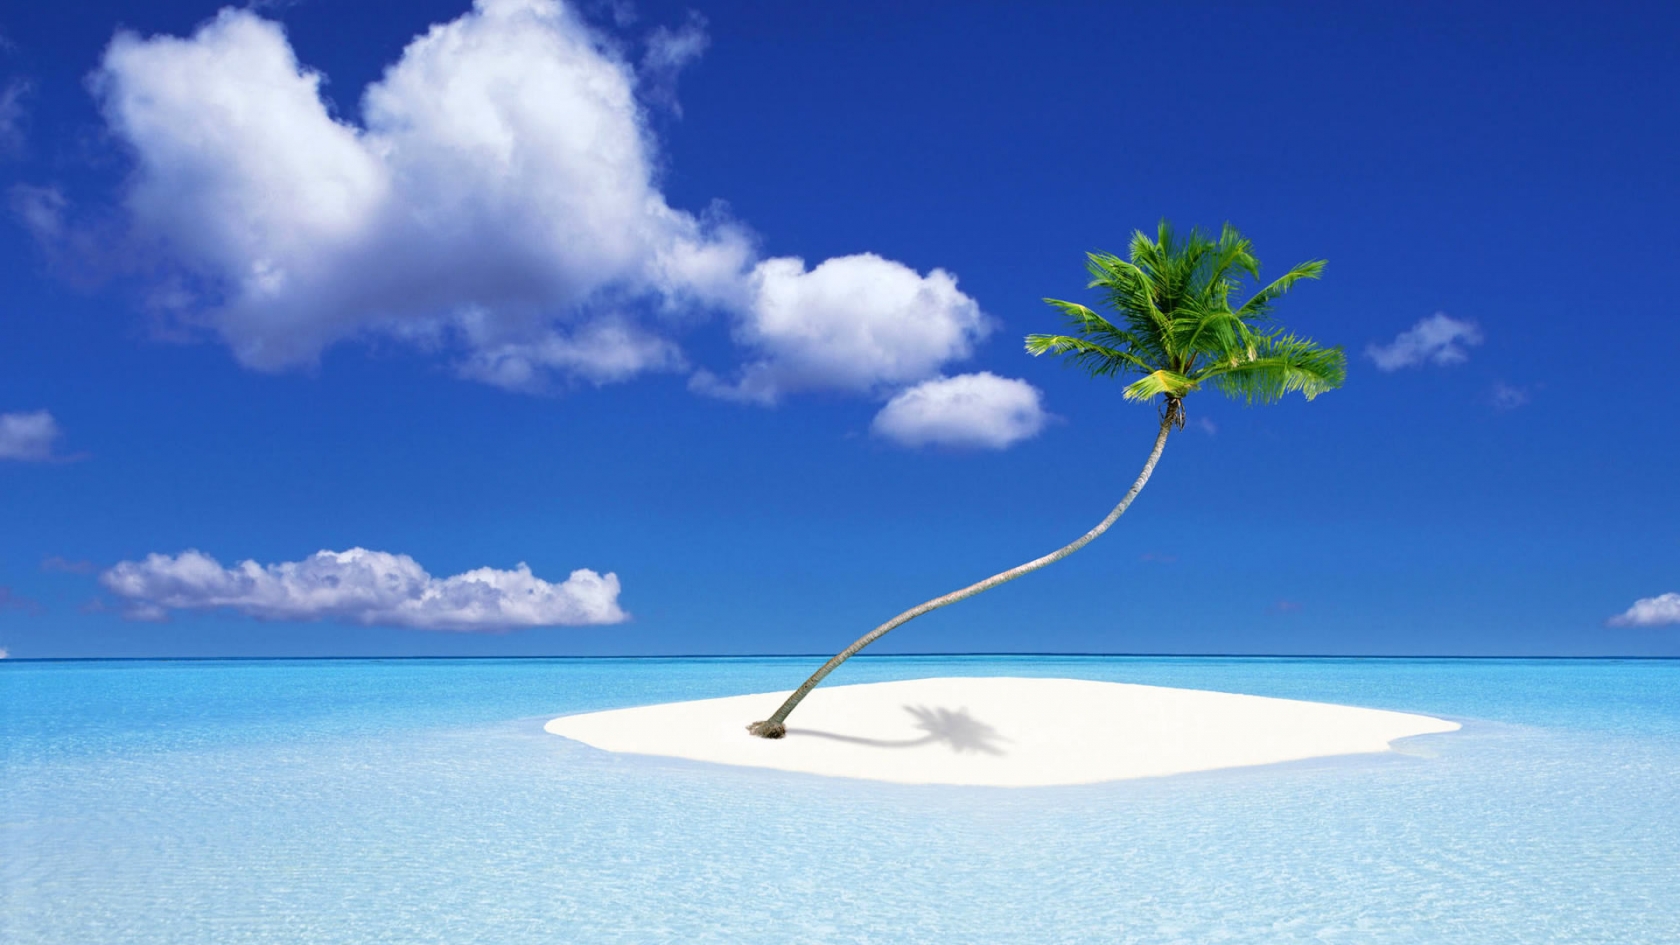 A Palm Tree Island for 1680 x 945 HDTV resolution